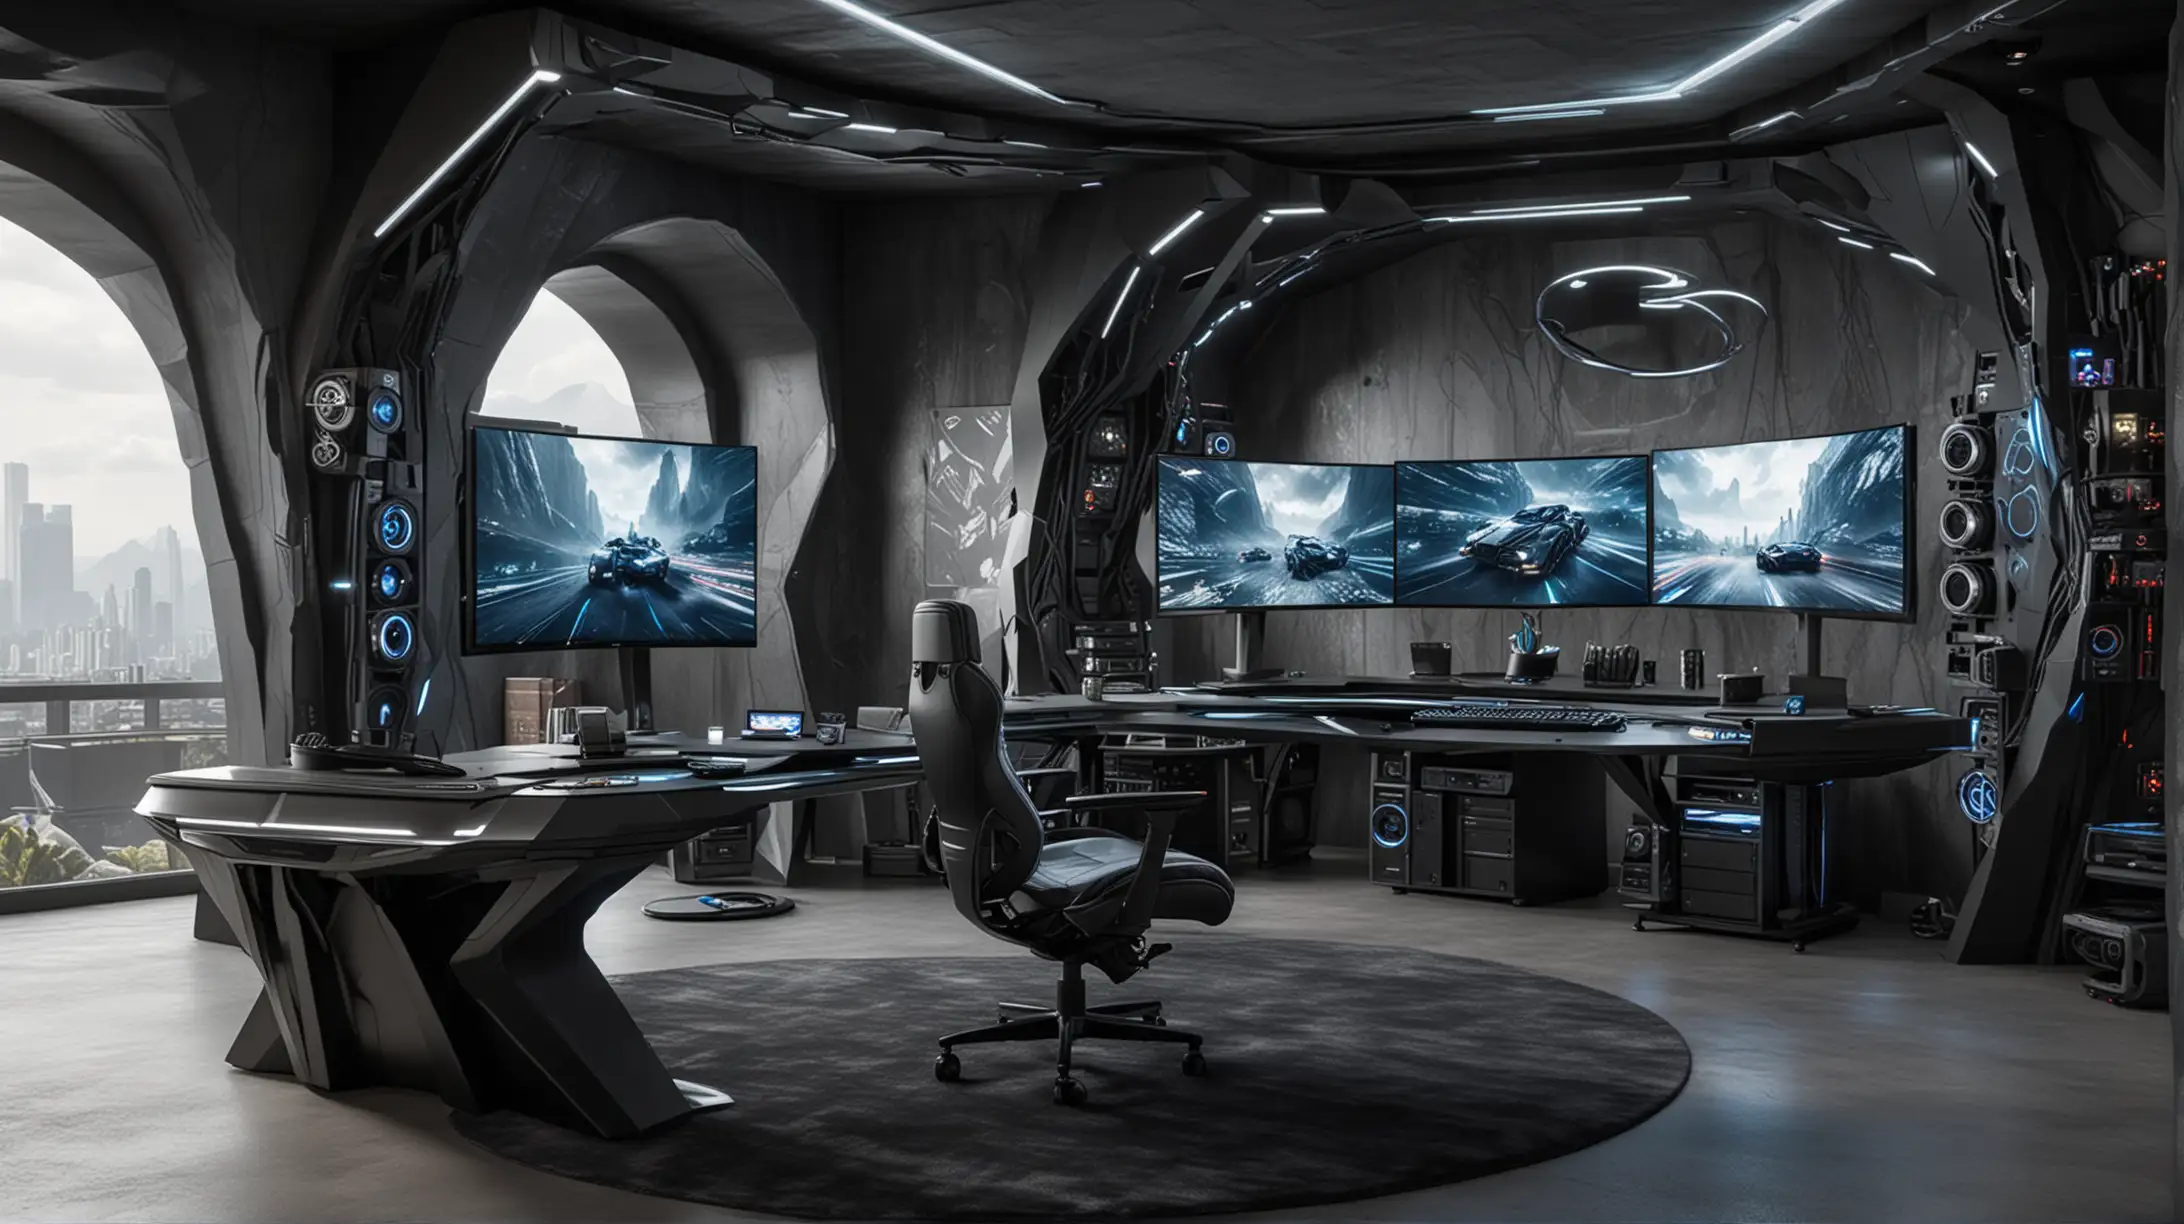 Elaborate super-computer desk setup and TV playroom design inspired by the aesthetics of the Batcave with Futuristic Ergonomic Gaming Computer Station with Ultra wide screens and home cinema.